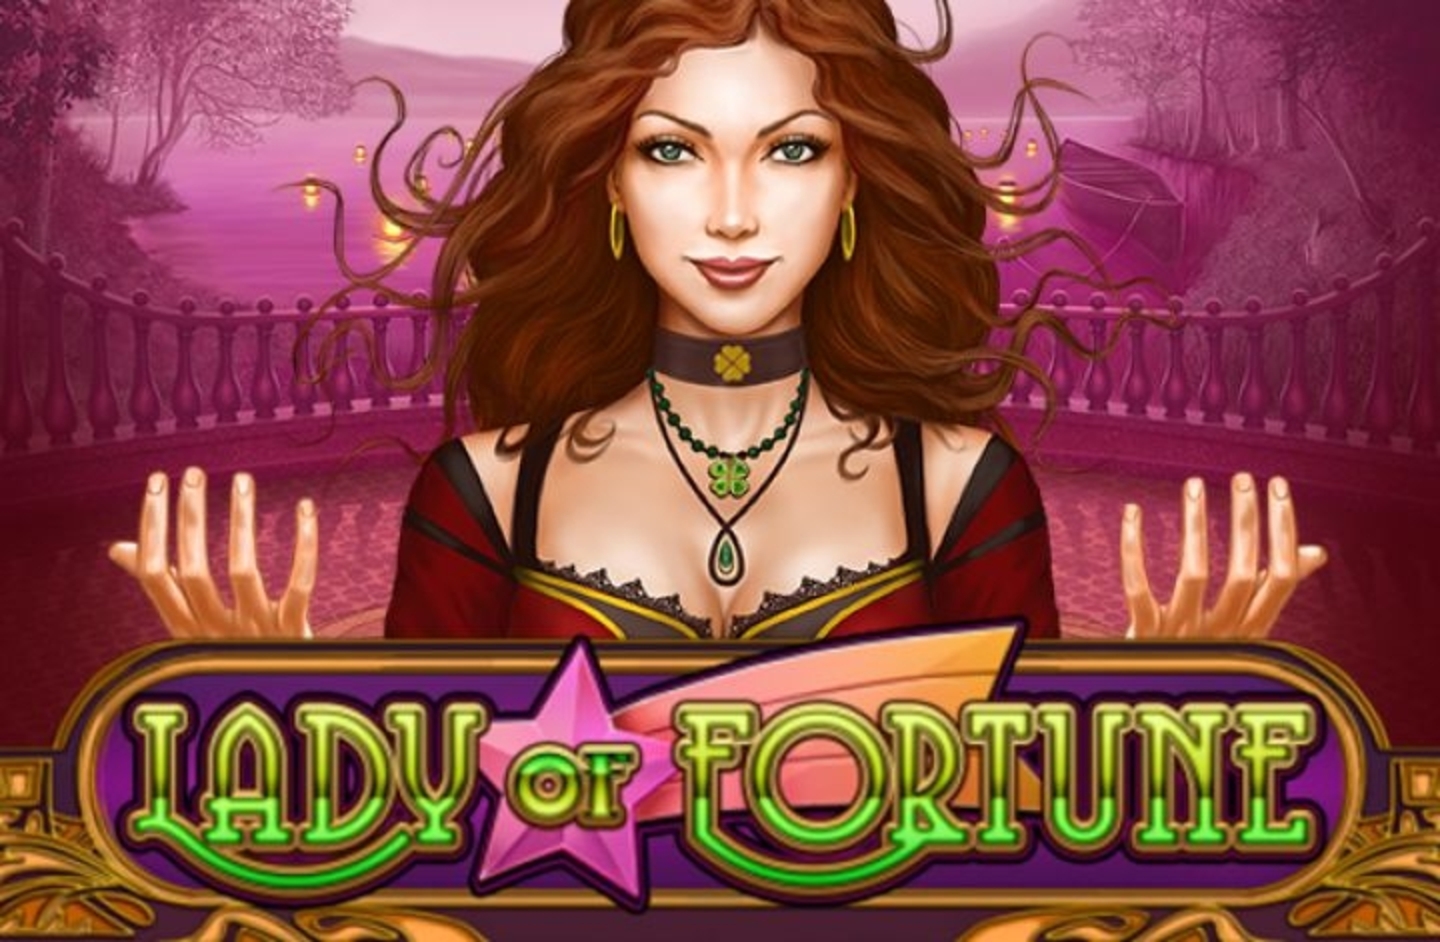 The Lady of Fortune Online Slot Demo Game by Playn GO